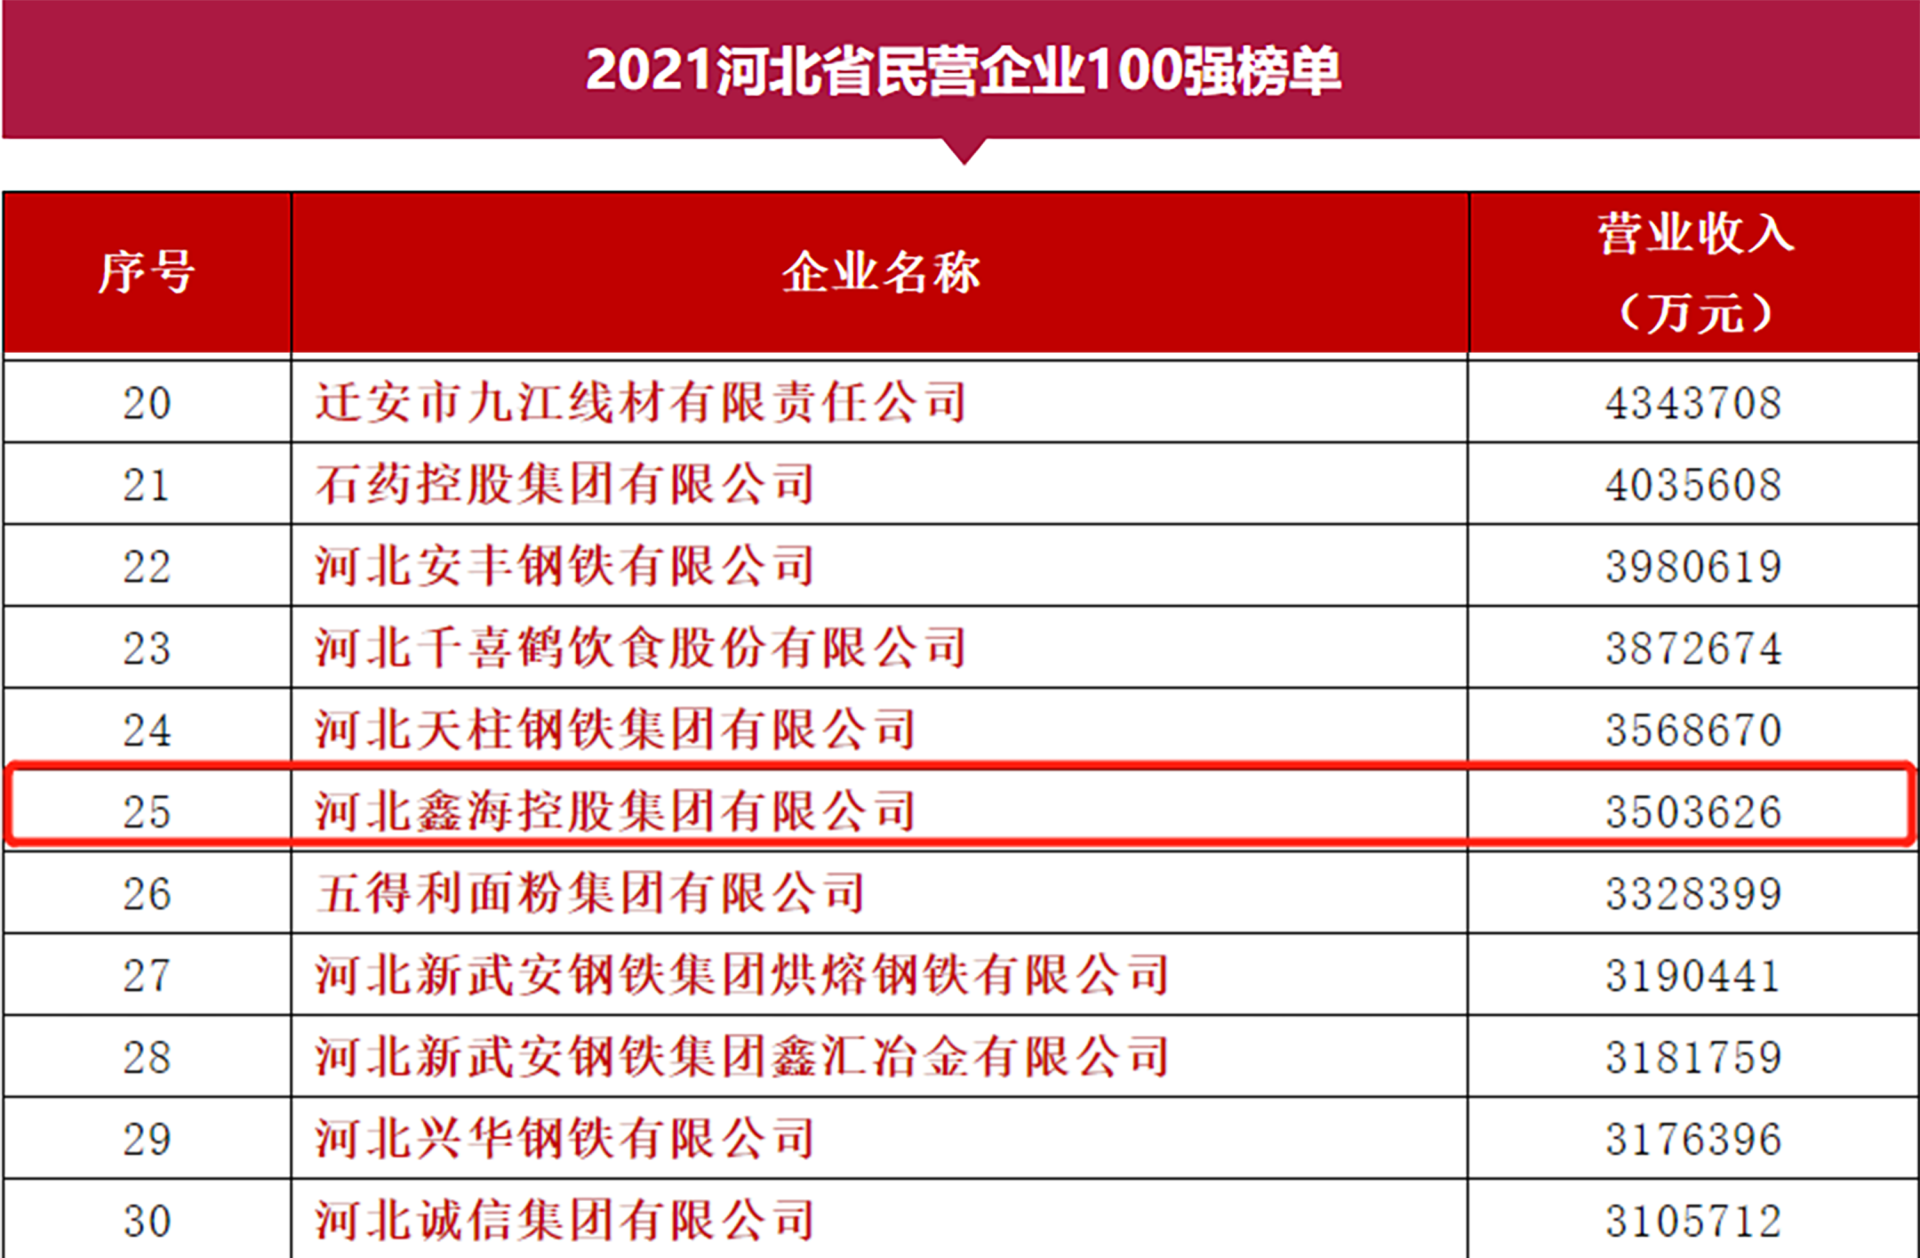 Good news! Xinhai Holding Group was ranked 25th among the top 100 private enterprises in Hebei Province and 20th among the top 100 private manufacturing enterprises in Hebei Province in 2021.